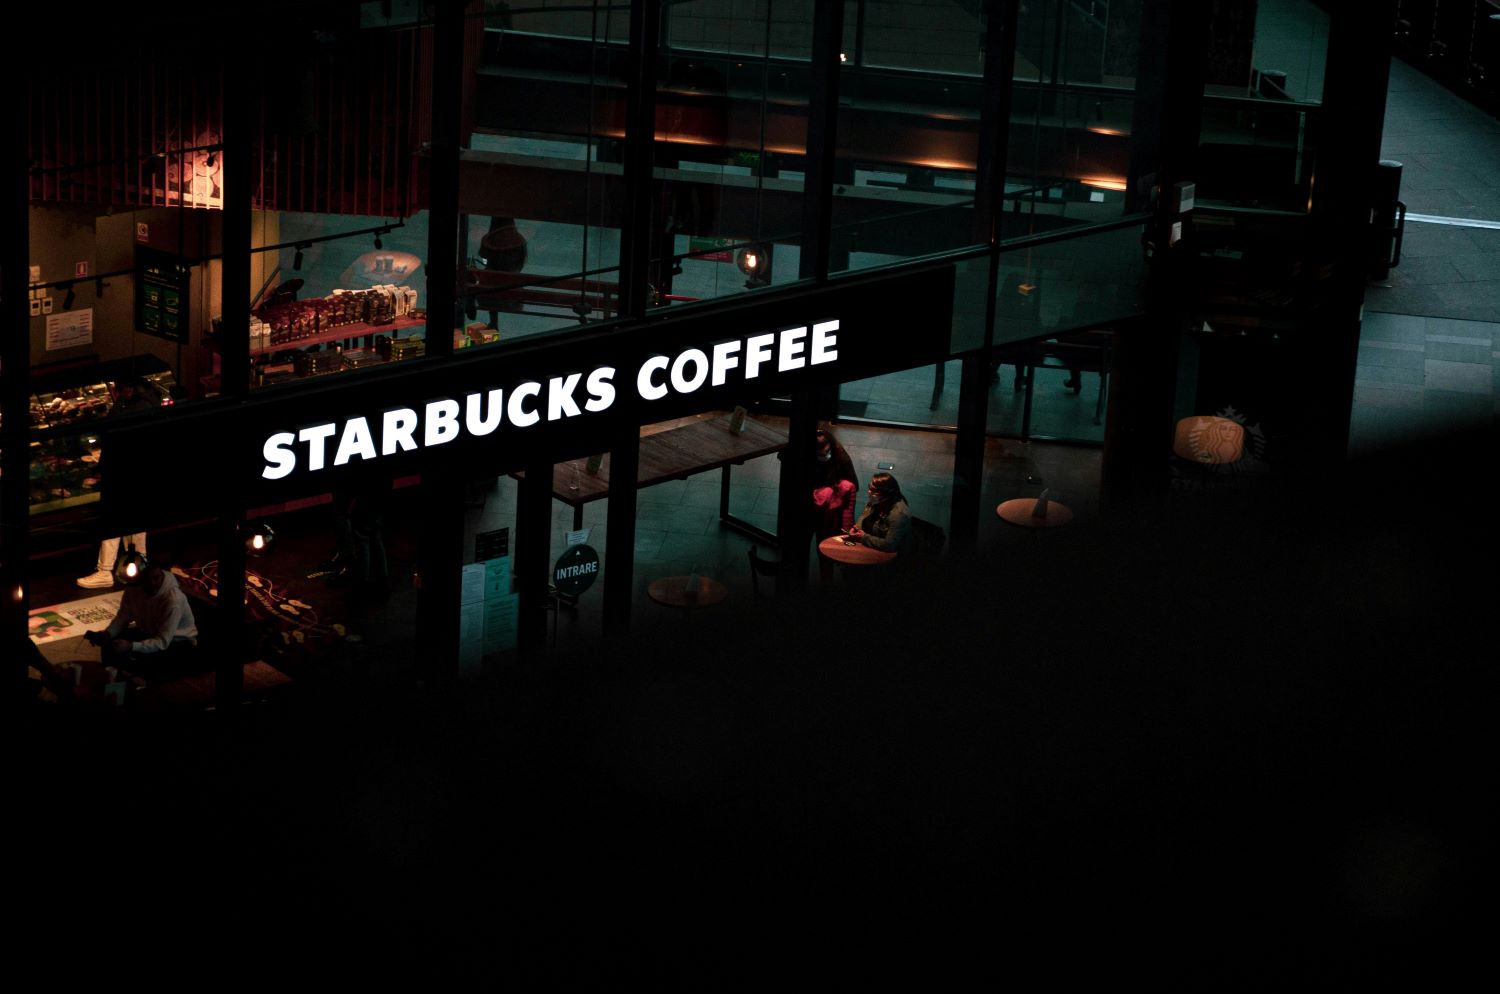 earn 500 delta miles for three visits to starbucks